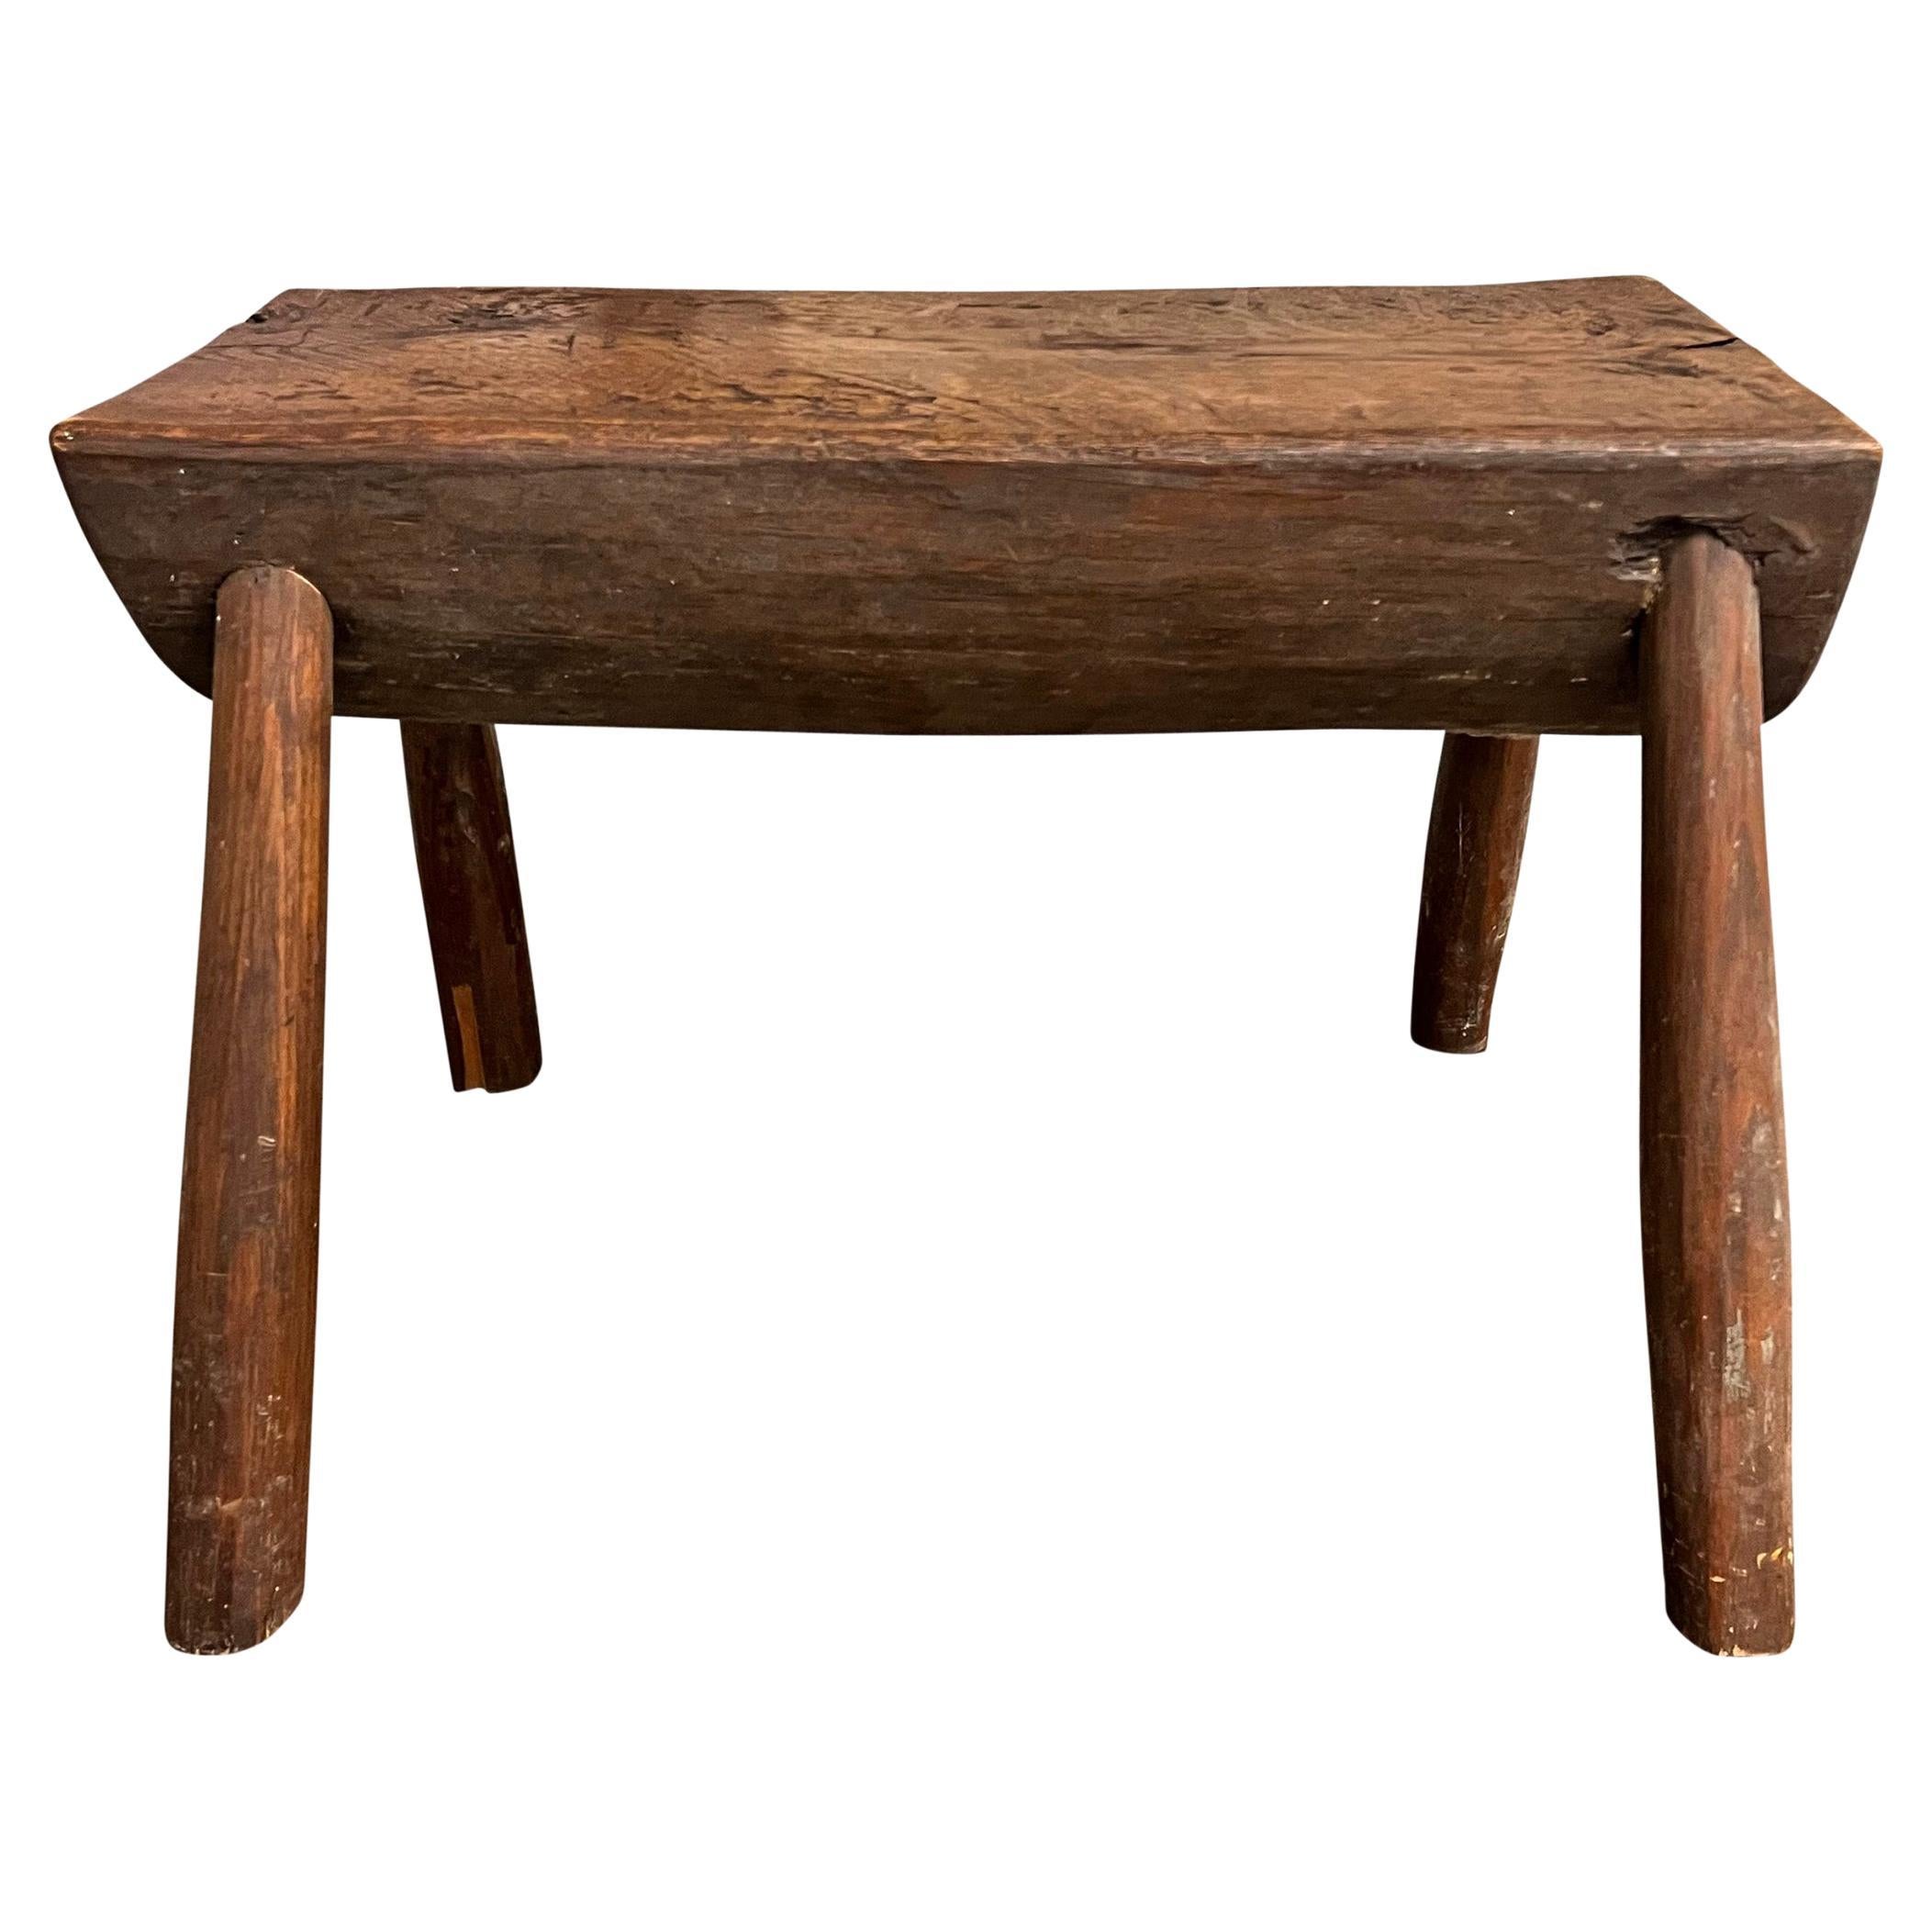 Early 20th Century American Primitive Milking Stool